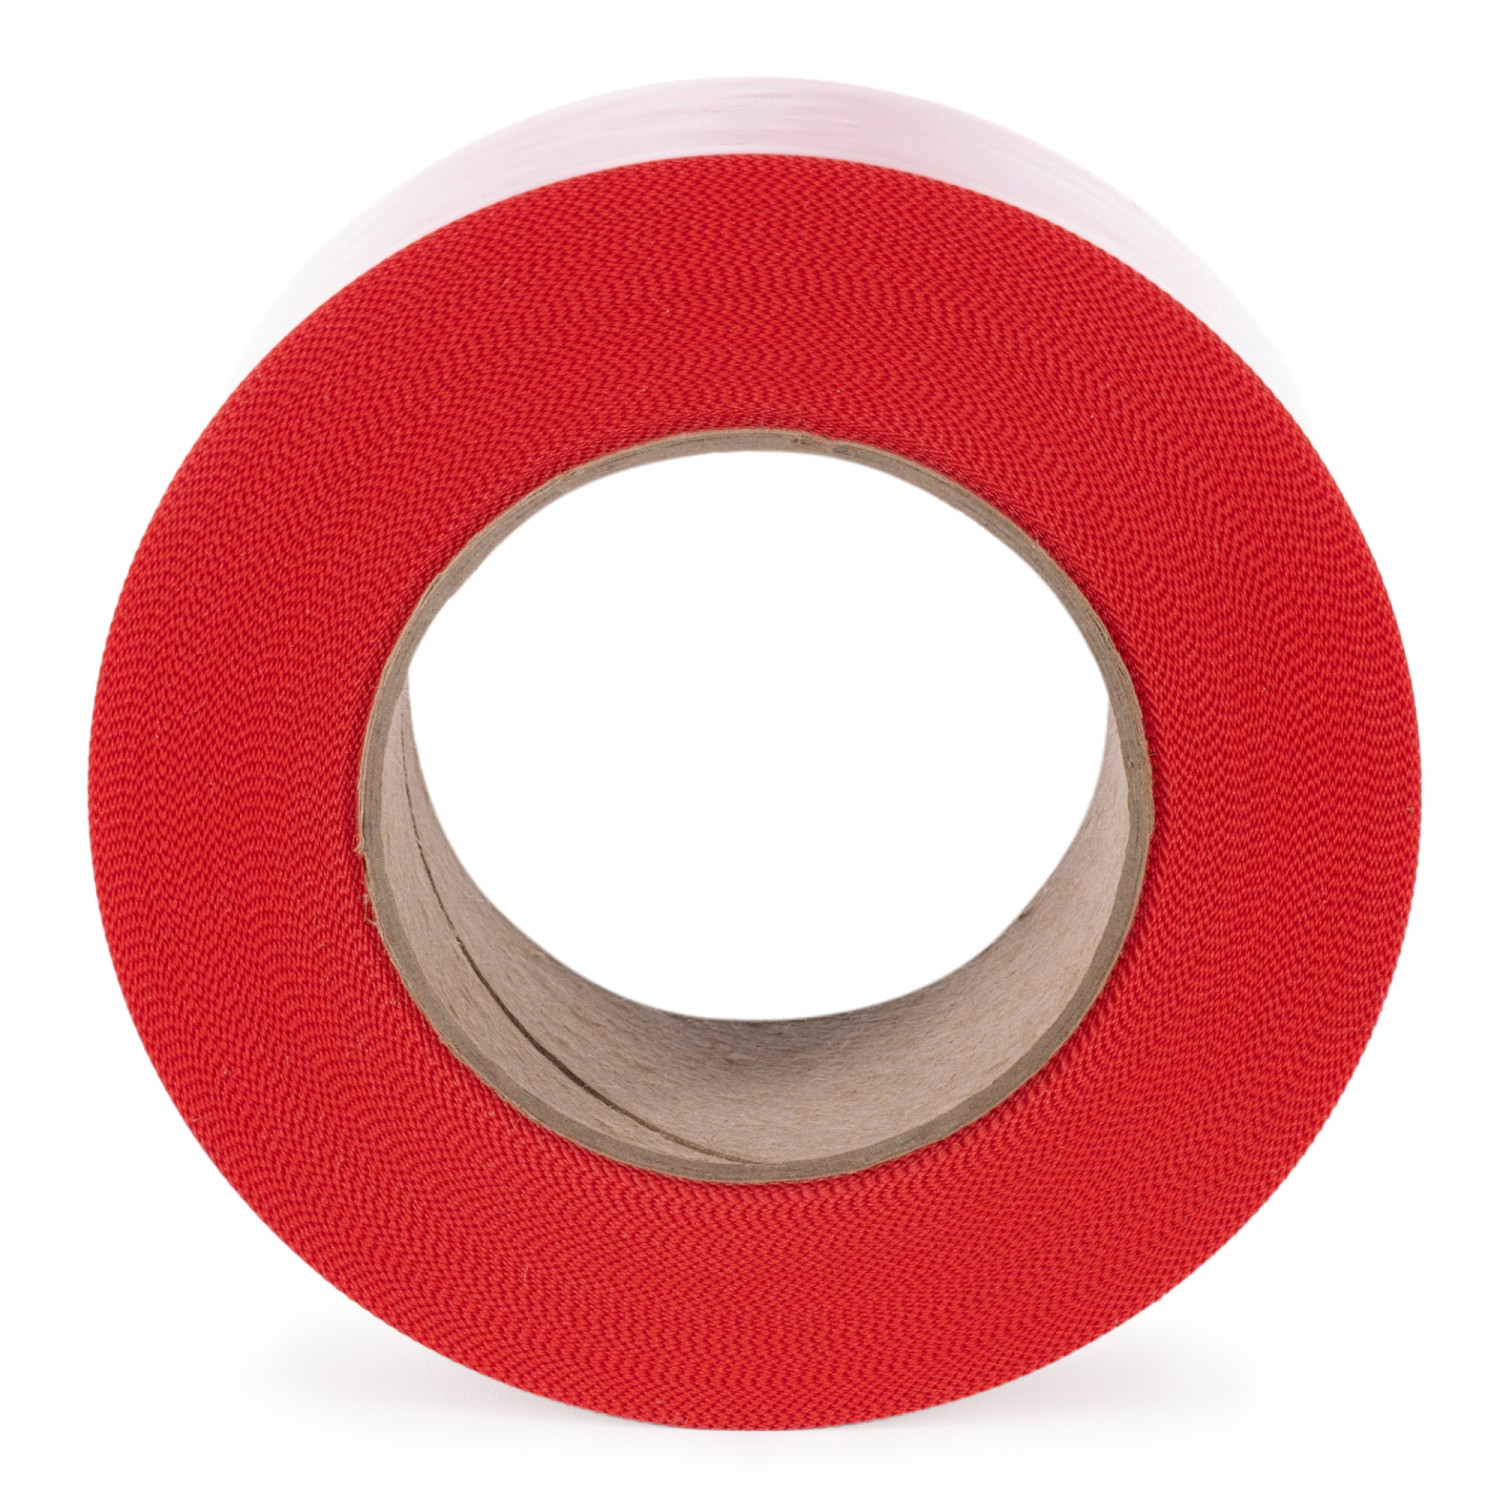 Heavy-Duty 2 x 60 Yards Red Stucco Tape, Smooth Edge buy in stock in U.S.  in IDL Packaging